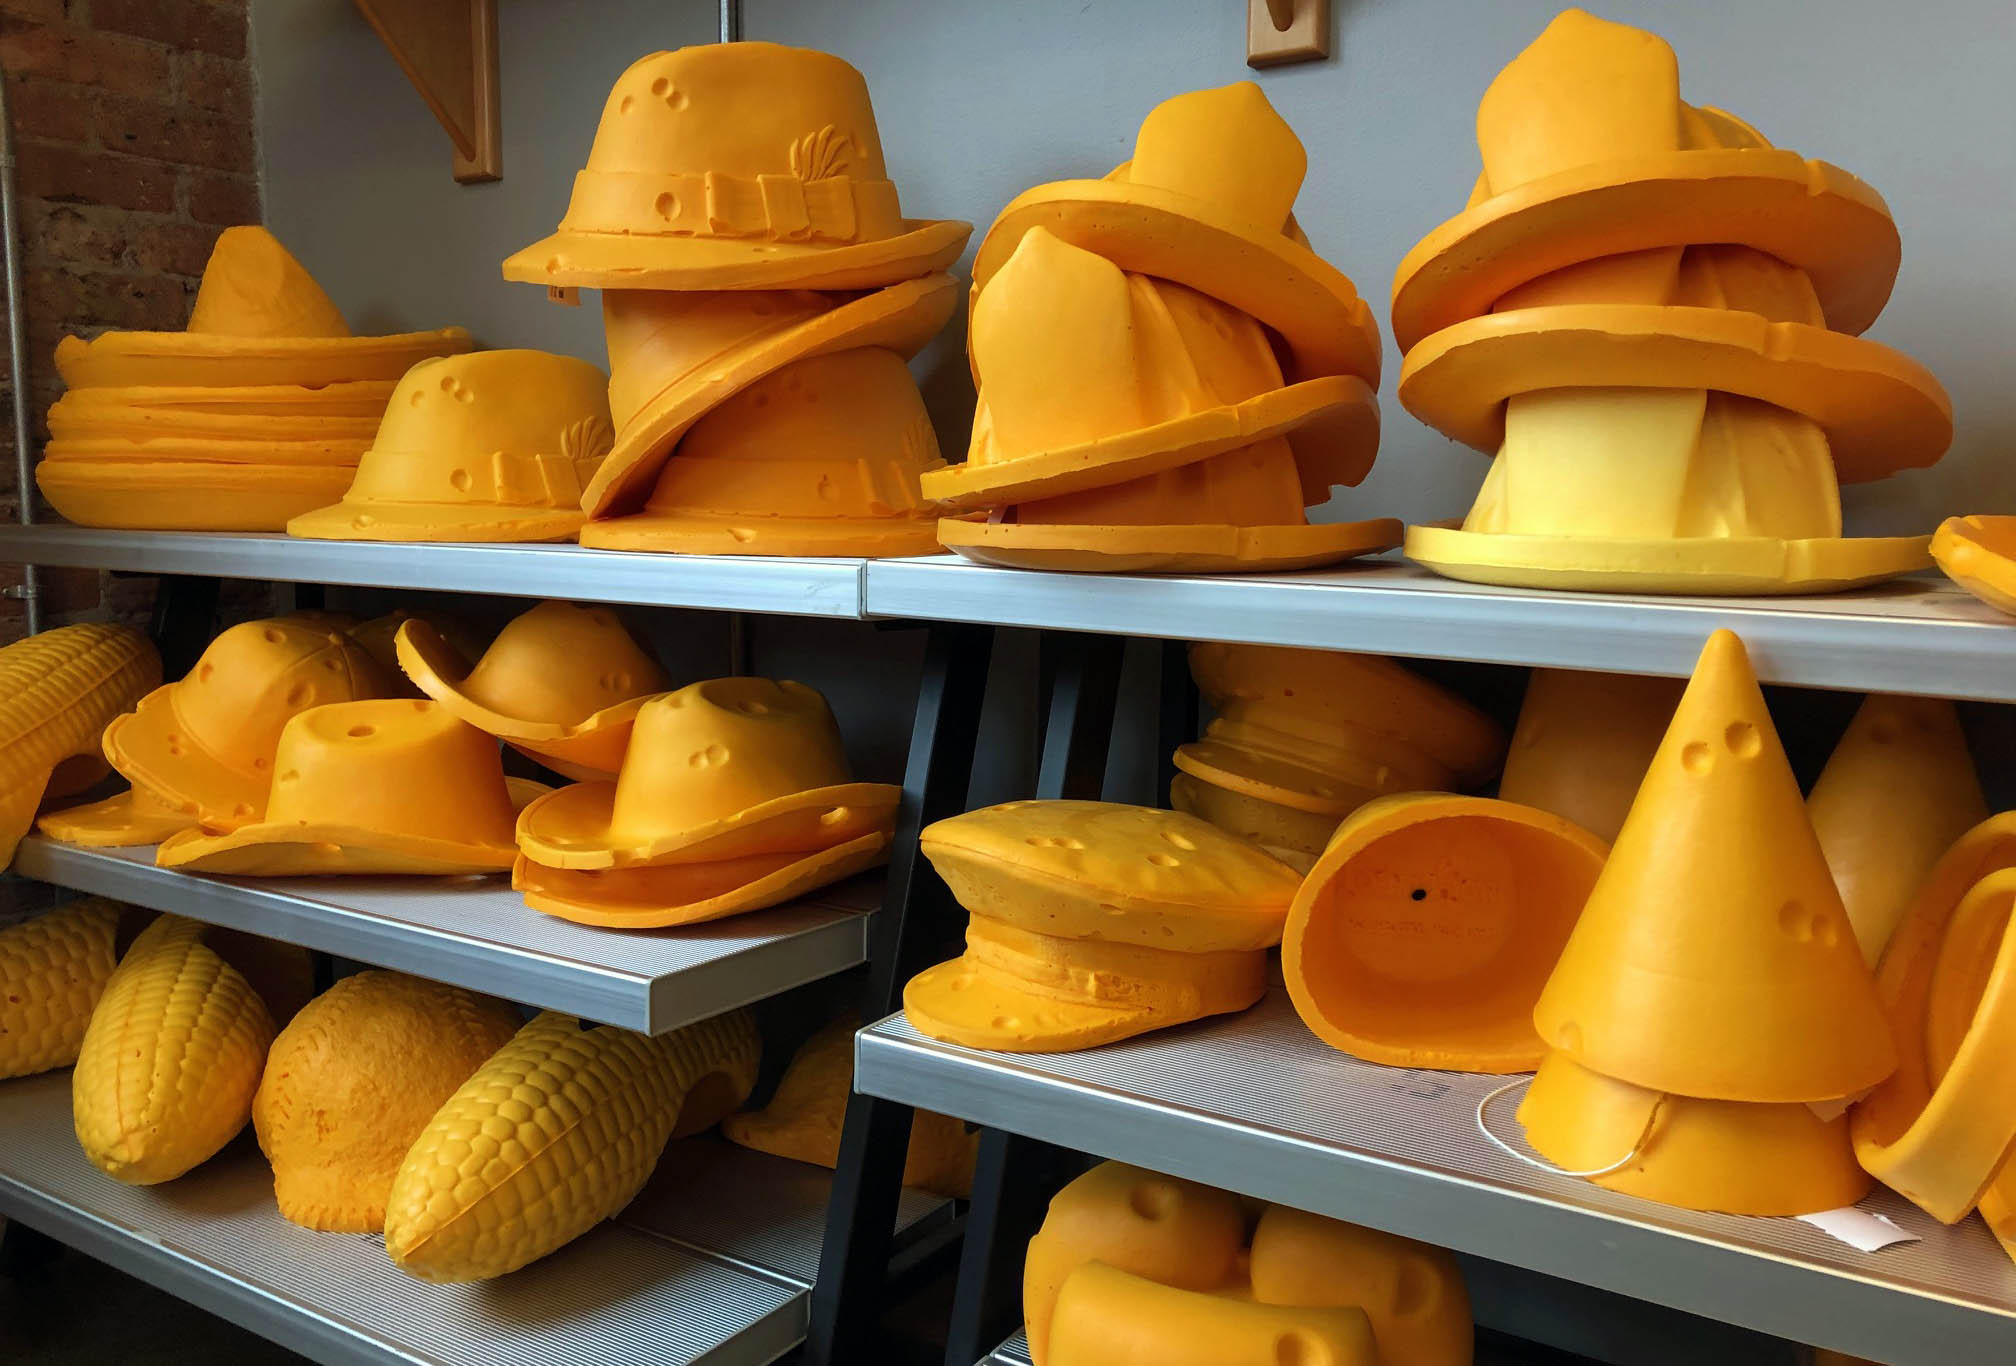 Why Do People Wear Cheeseheads?